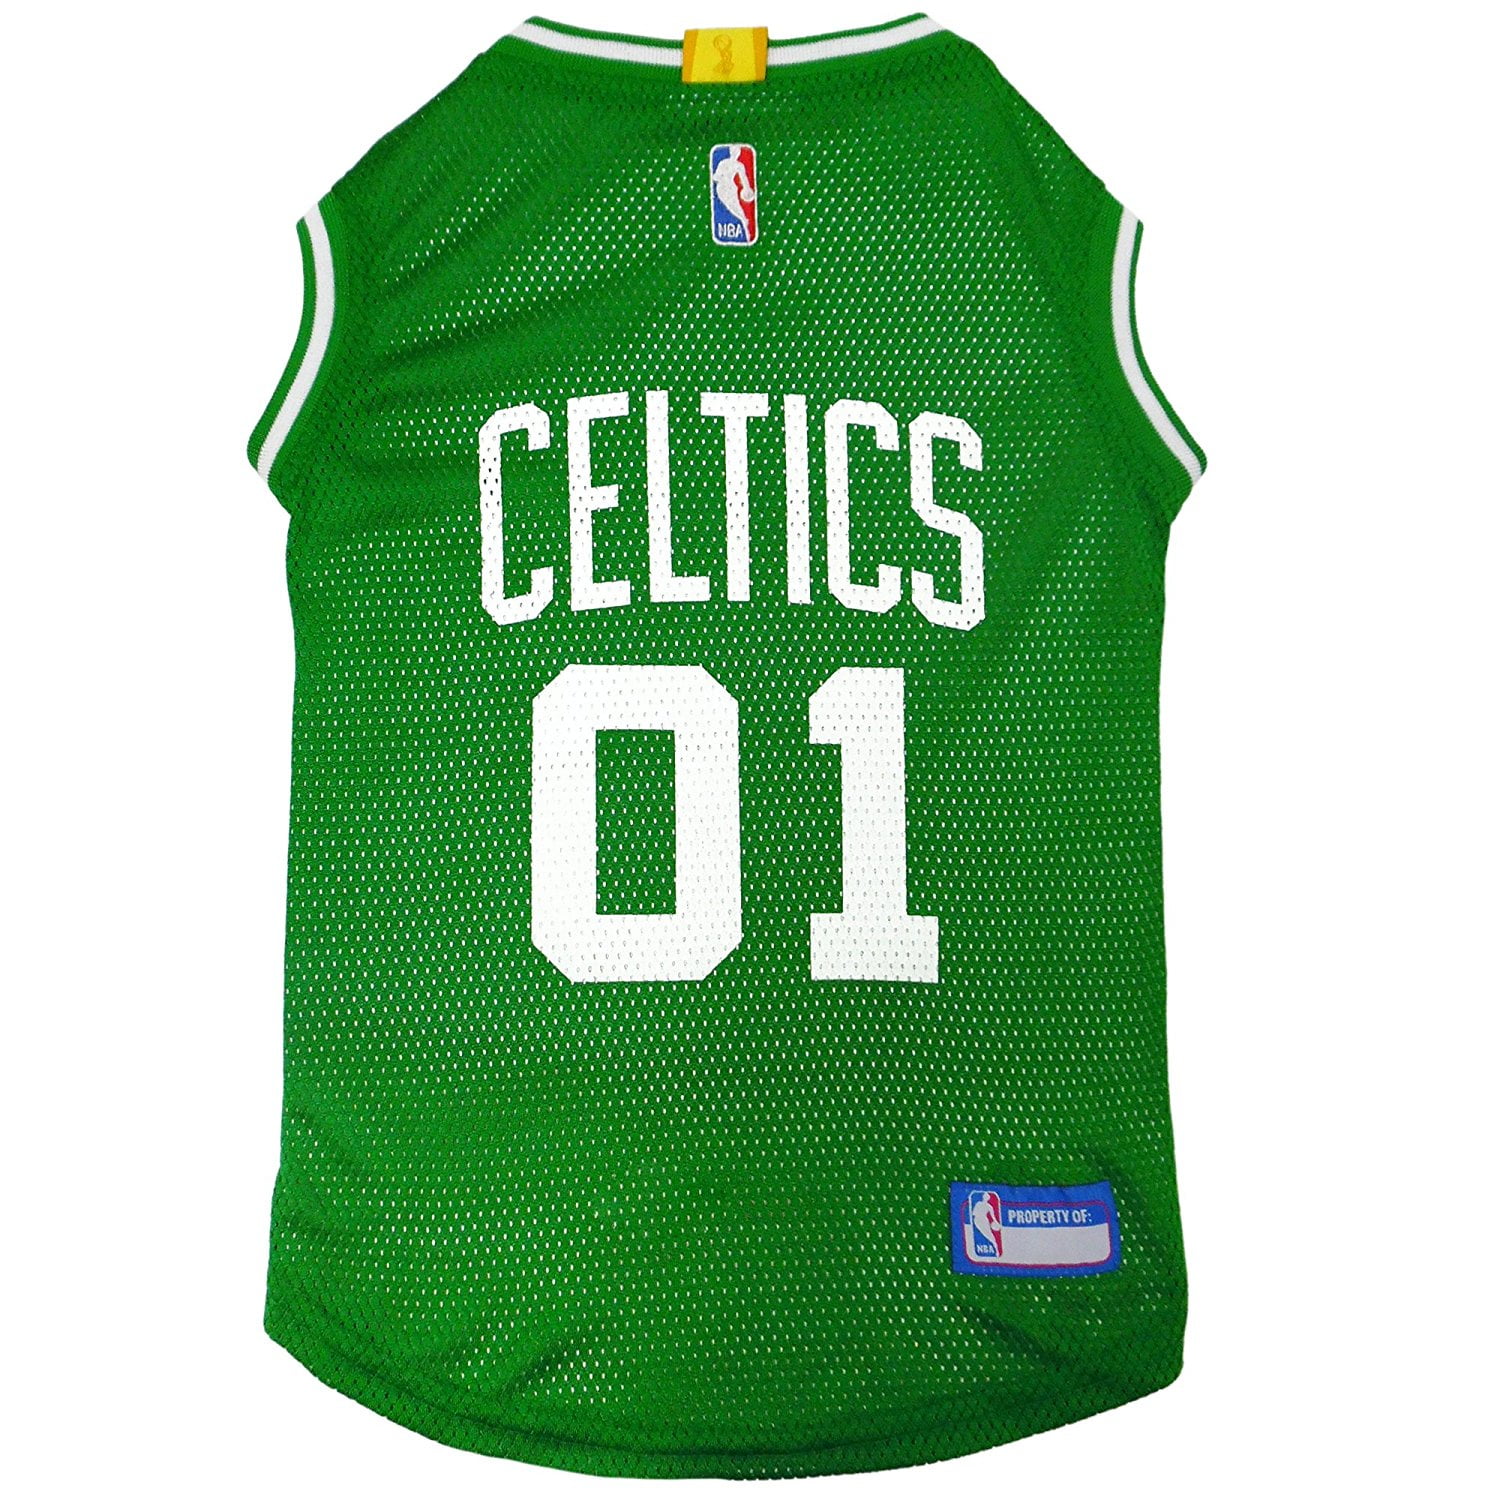 Buy NBA Jerseys And Have Cash Back With These Superstars Items